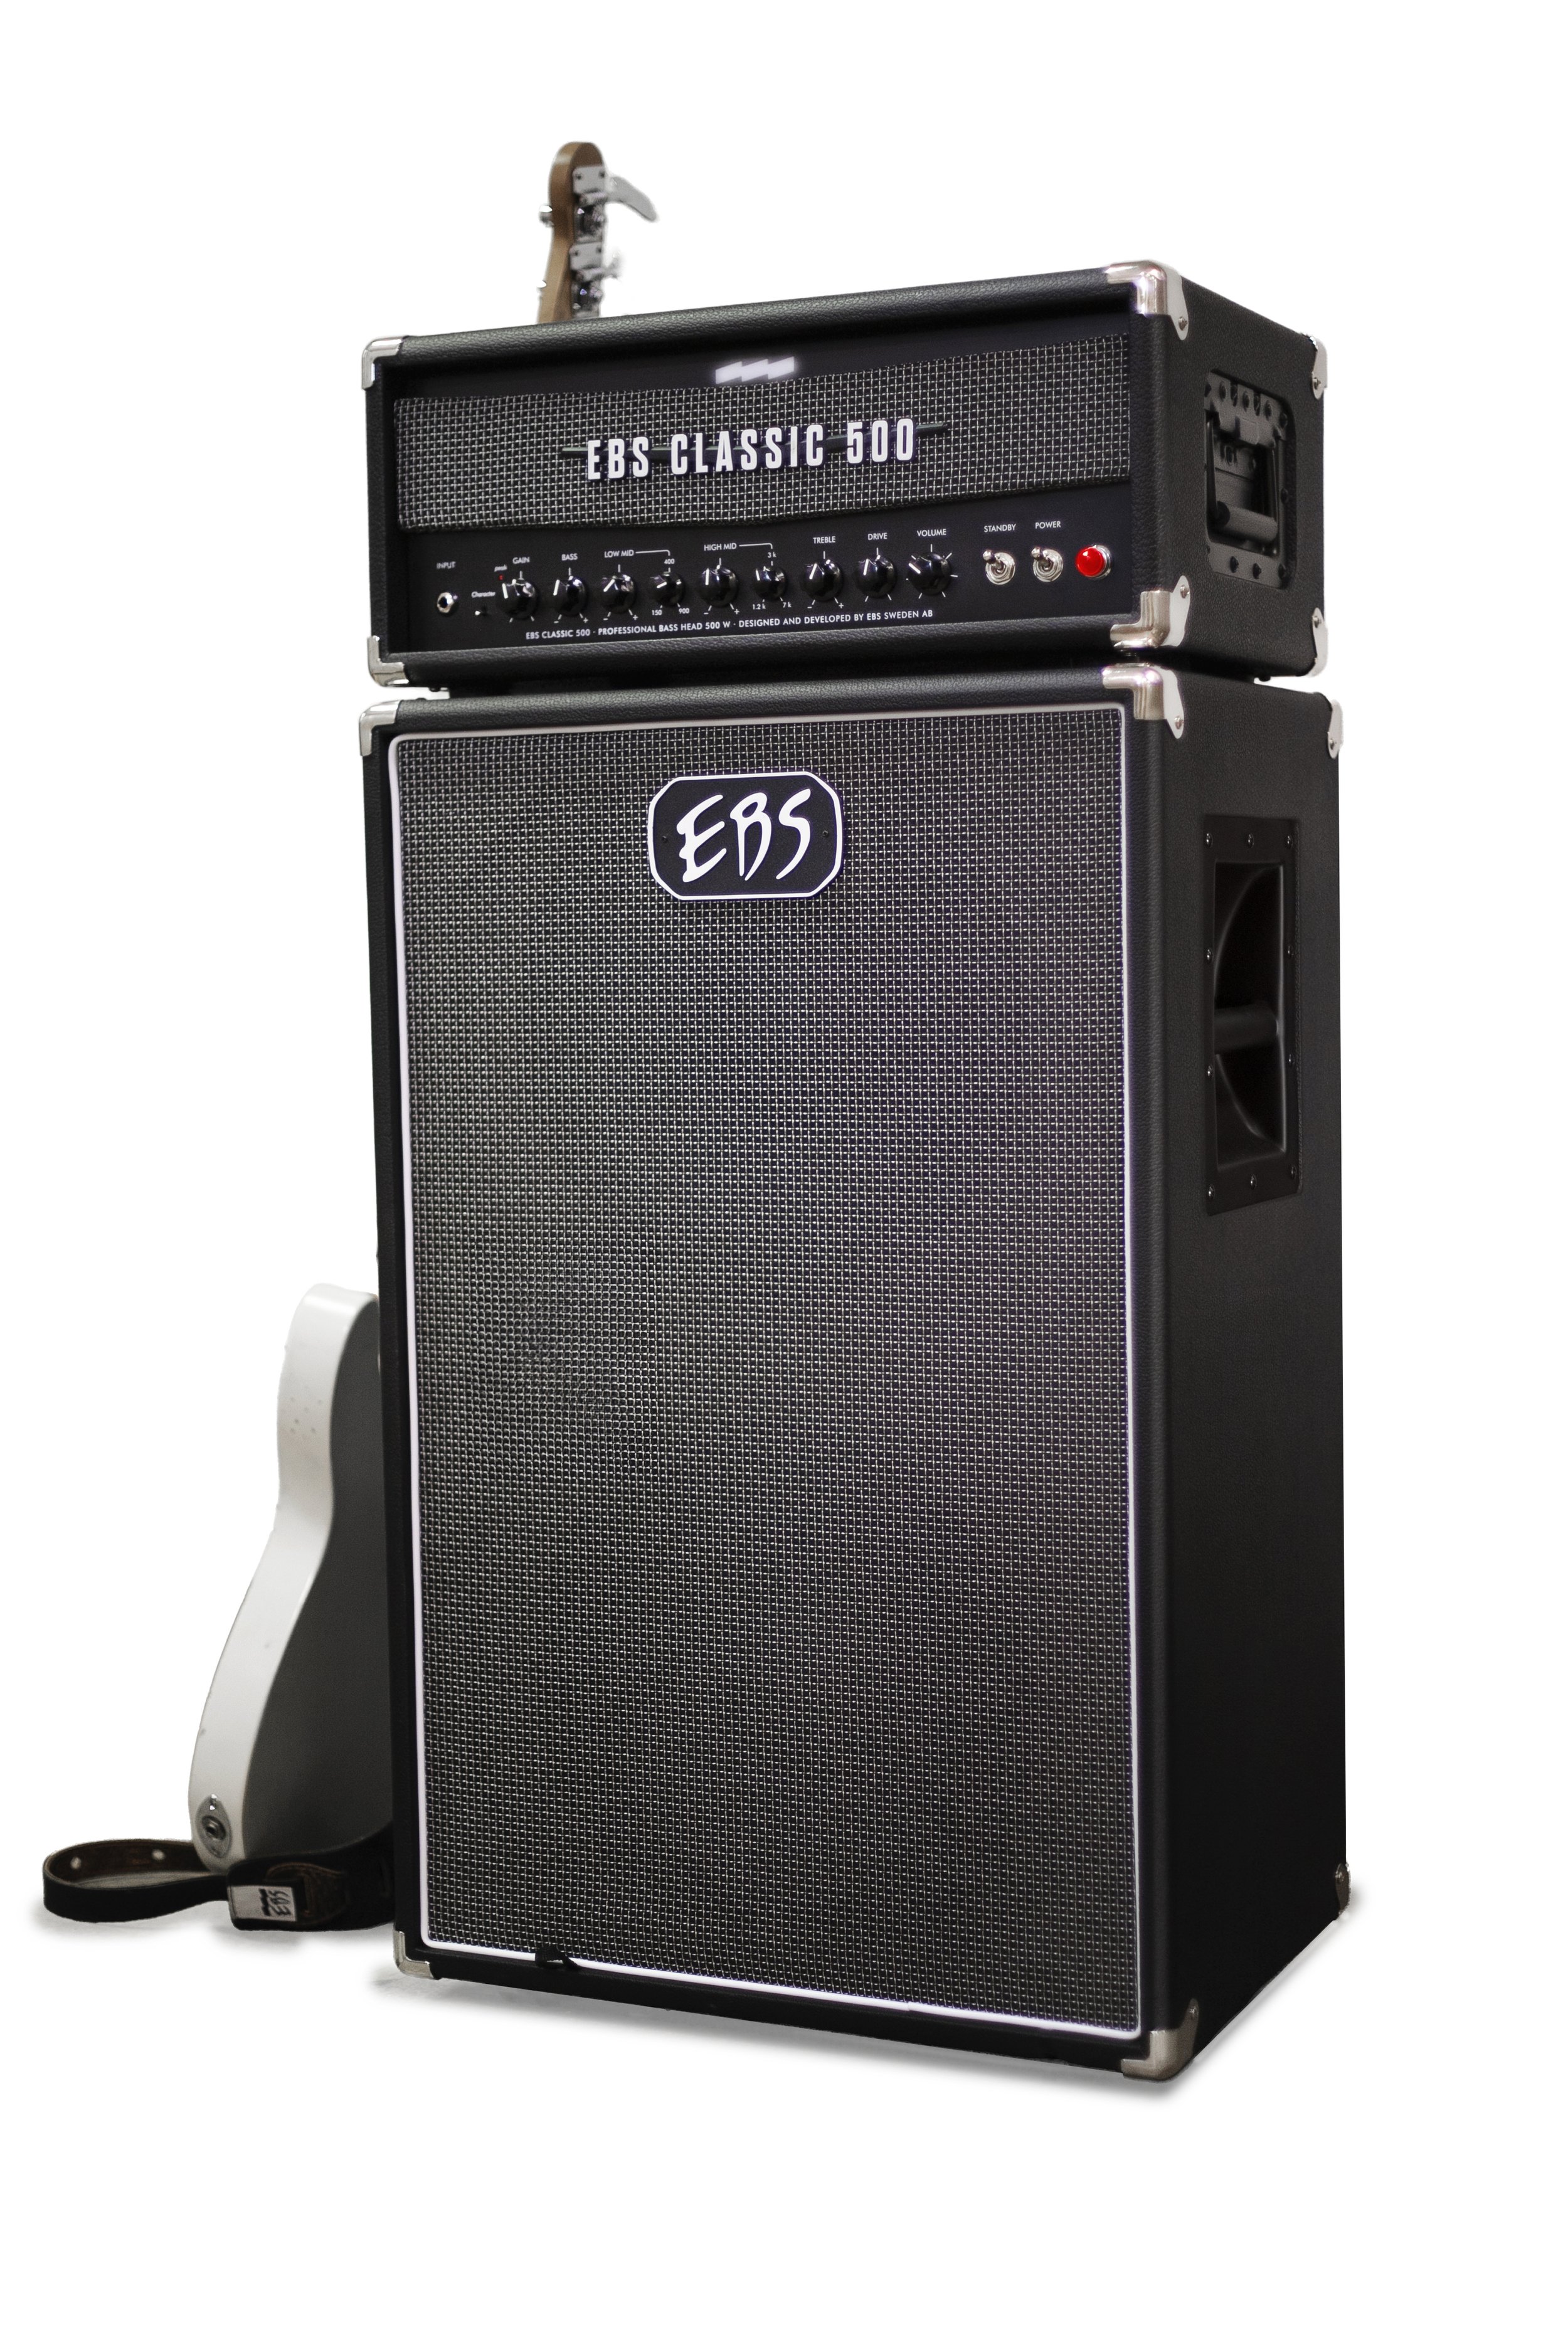 EBS_Classic212Standing_withClassic500amp.jpg